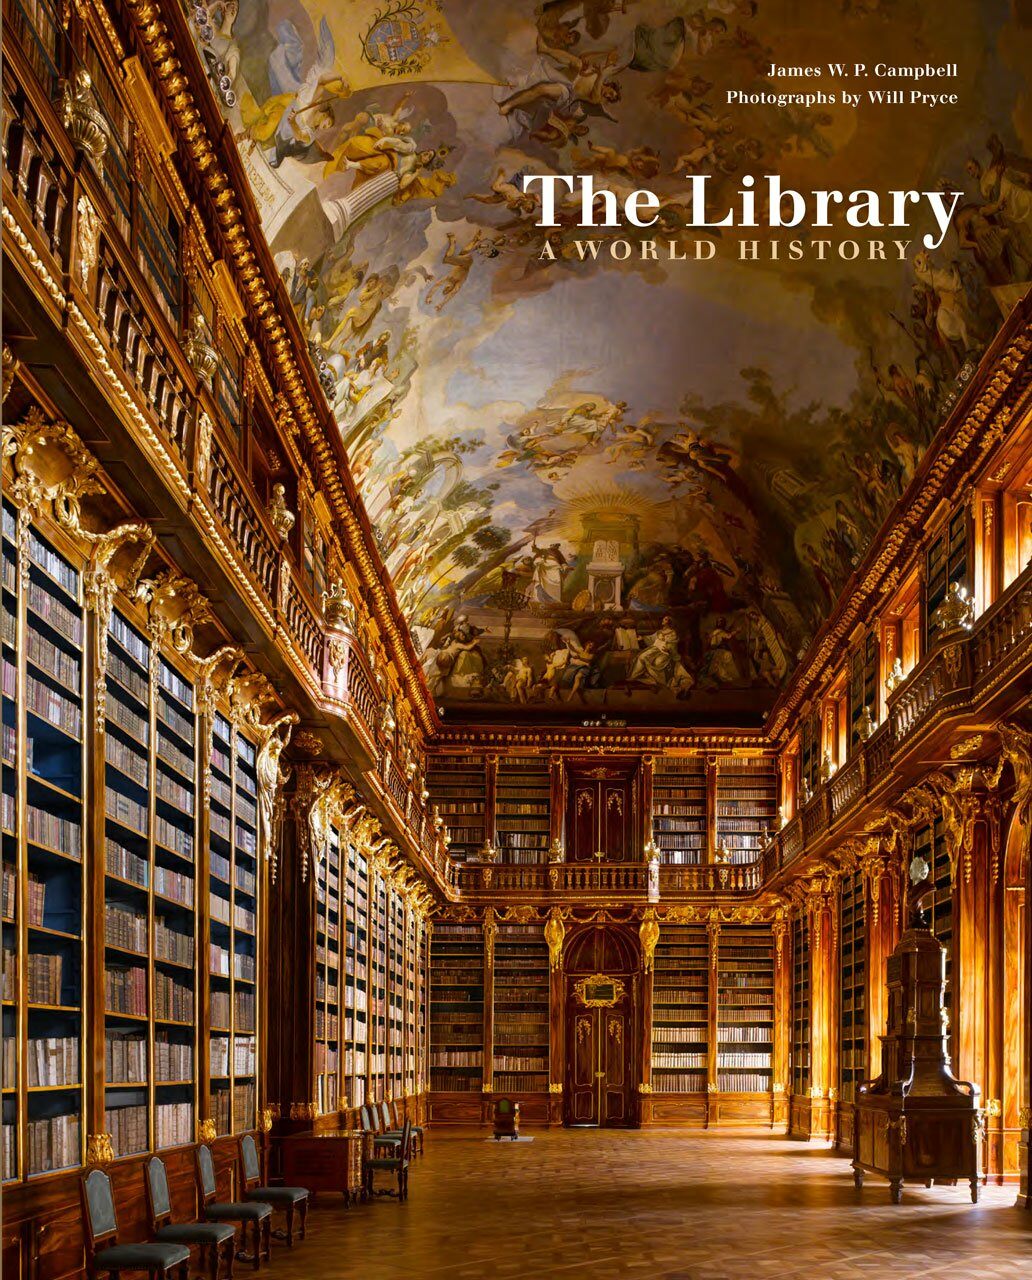 The Library: A World History (Hardcover)